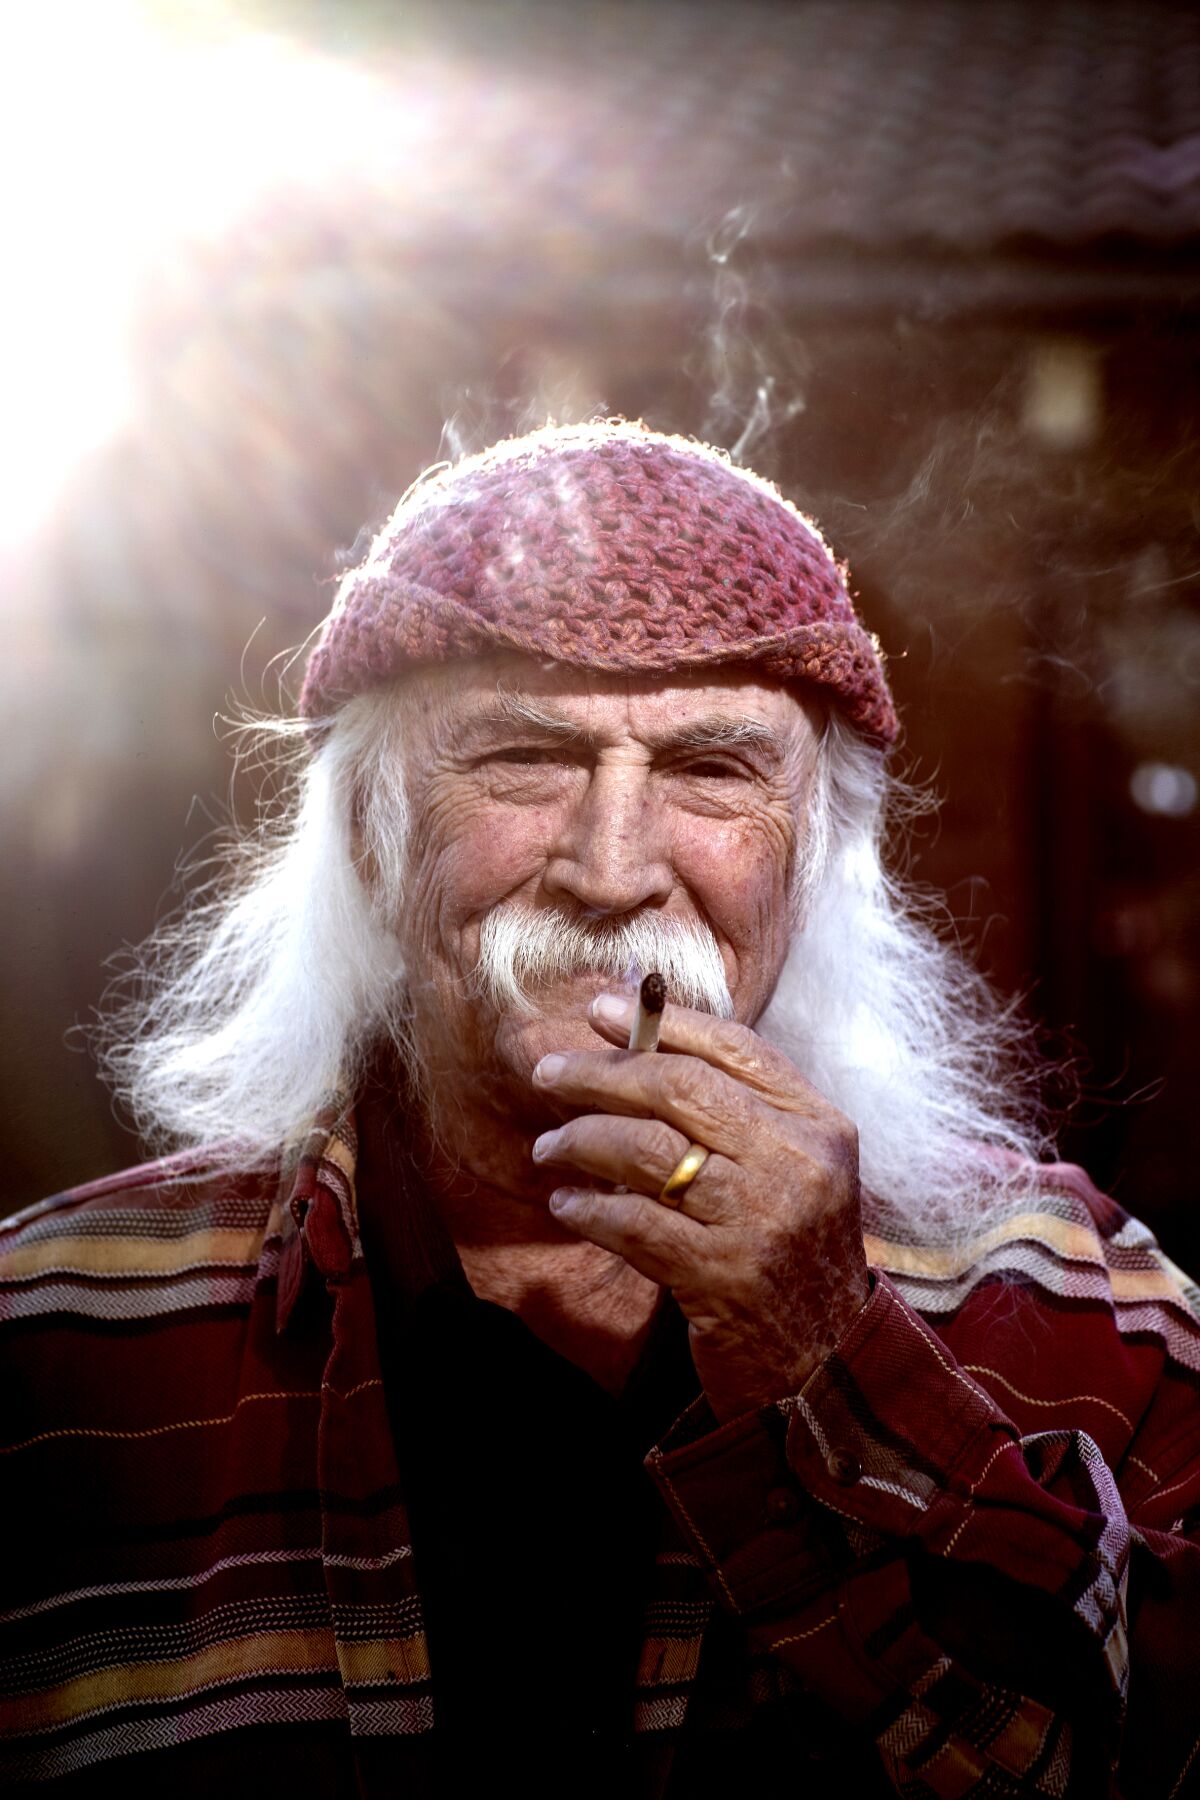 David Crosby at his home in Santa Ynez on February 25.